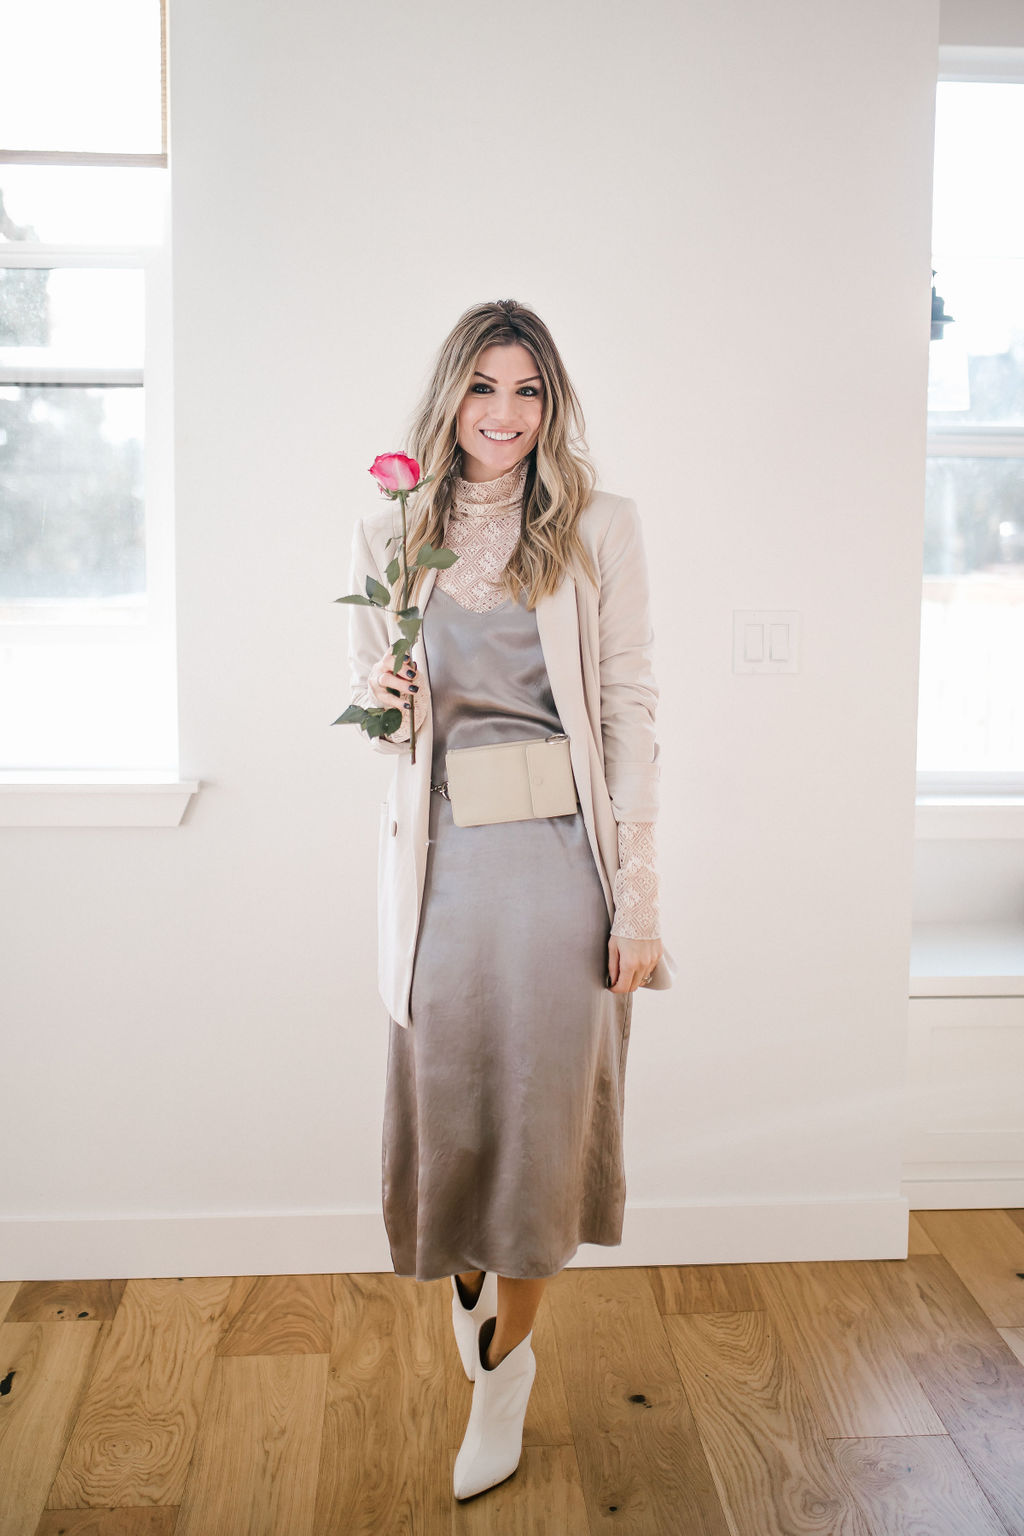 The Grey Edit - Galentine's Brunch - Blogging Community - Styled Out West Home